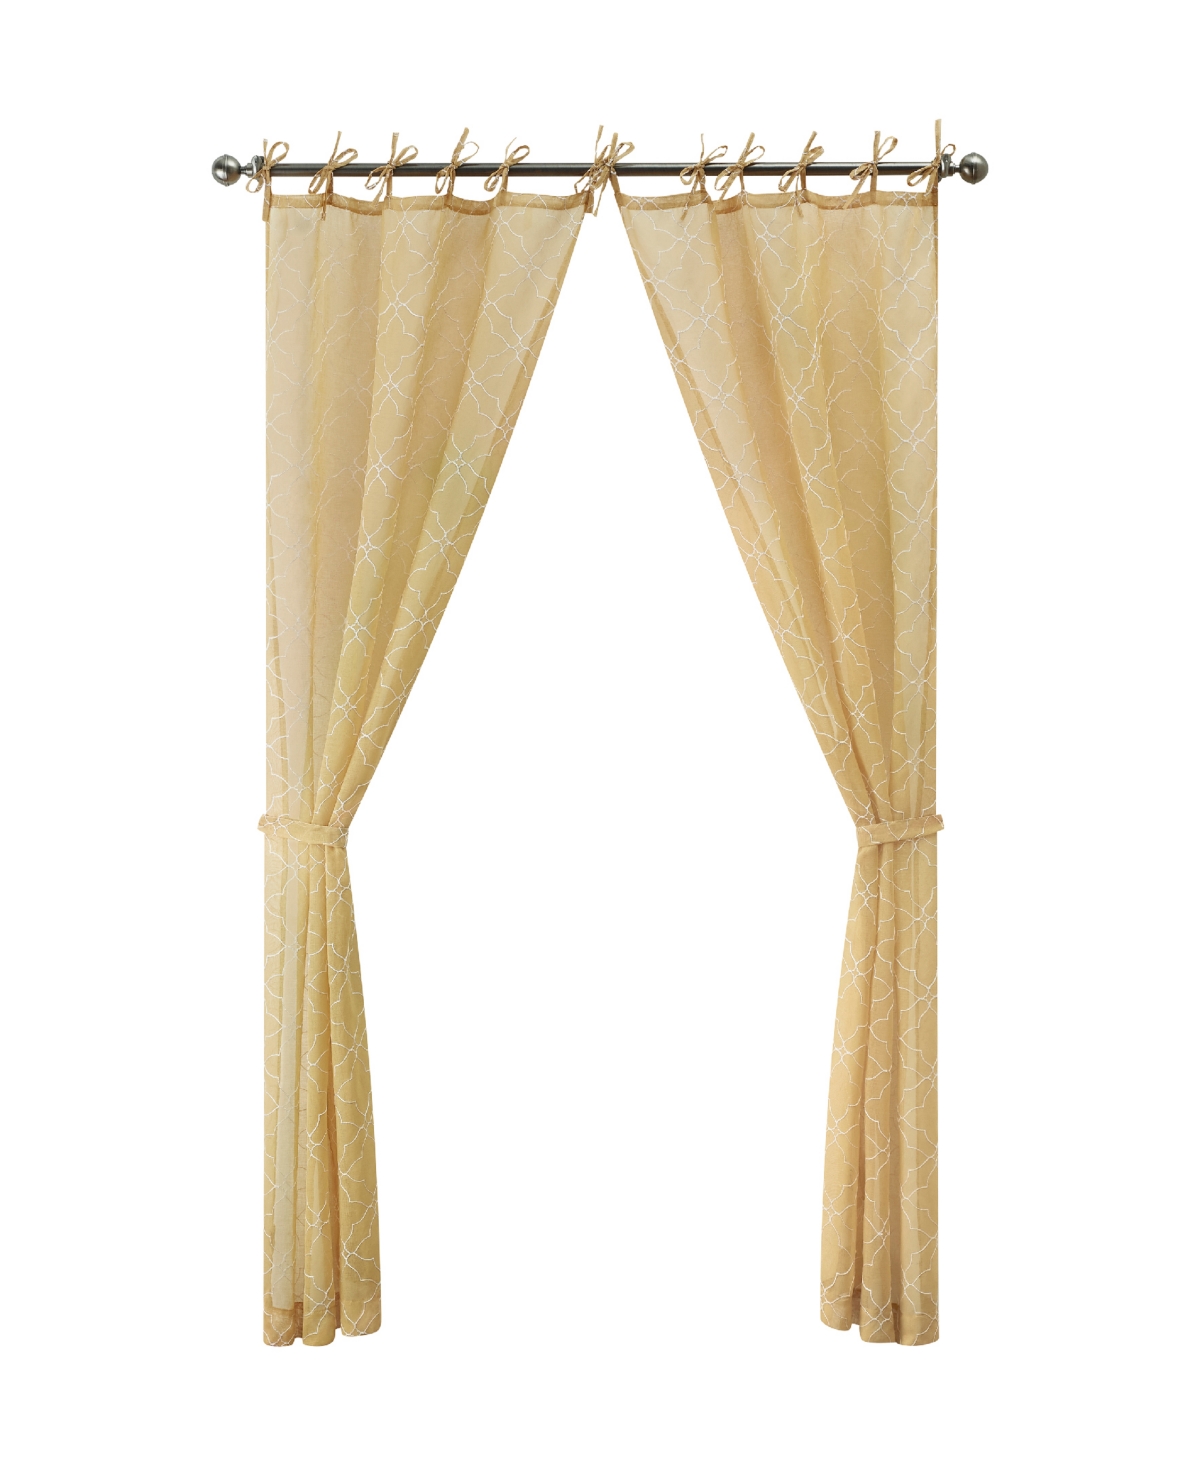 Jessica Simpson Nora Embroidery Sheer Tie Top Window Curtain Panel Pair With Tiebacks, 38" X 84" In Gold-tone